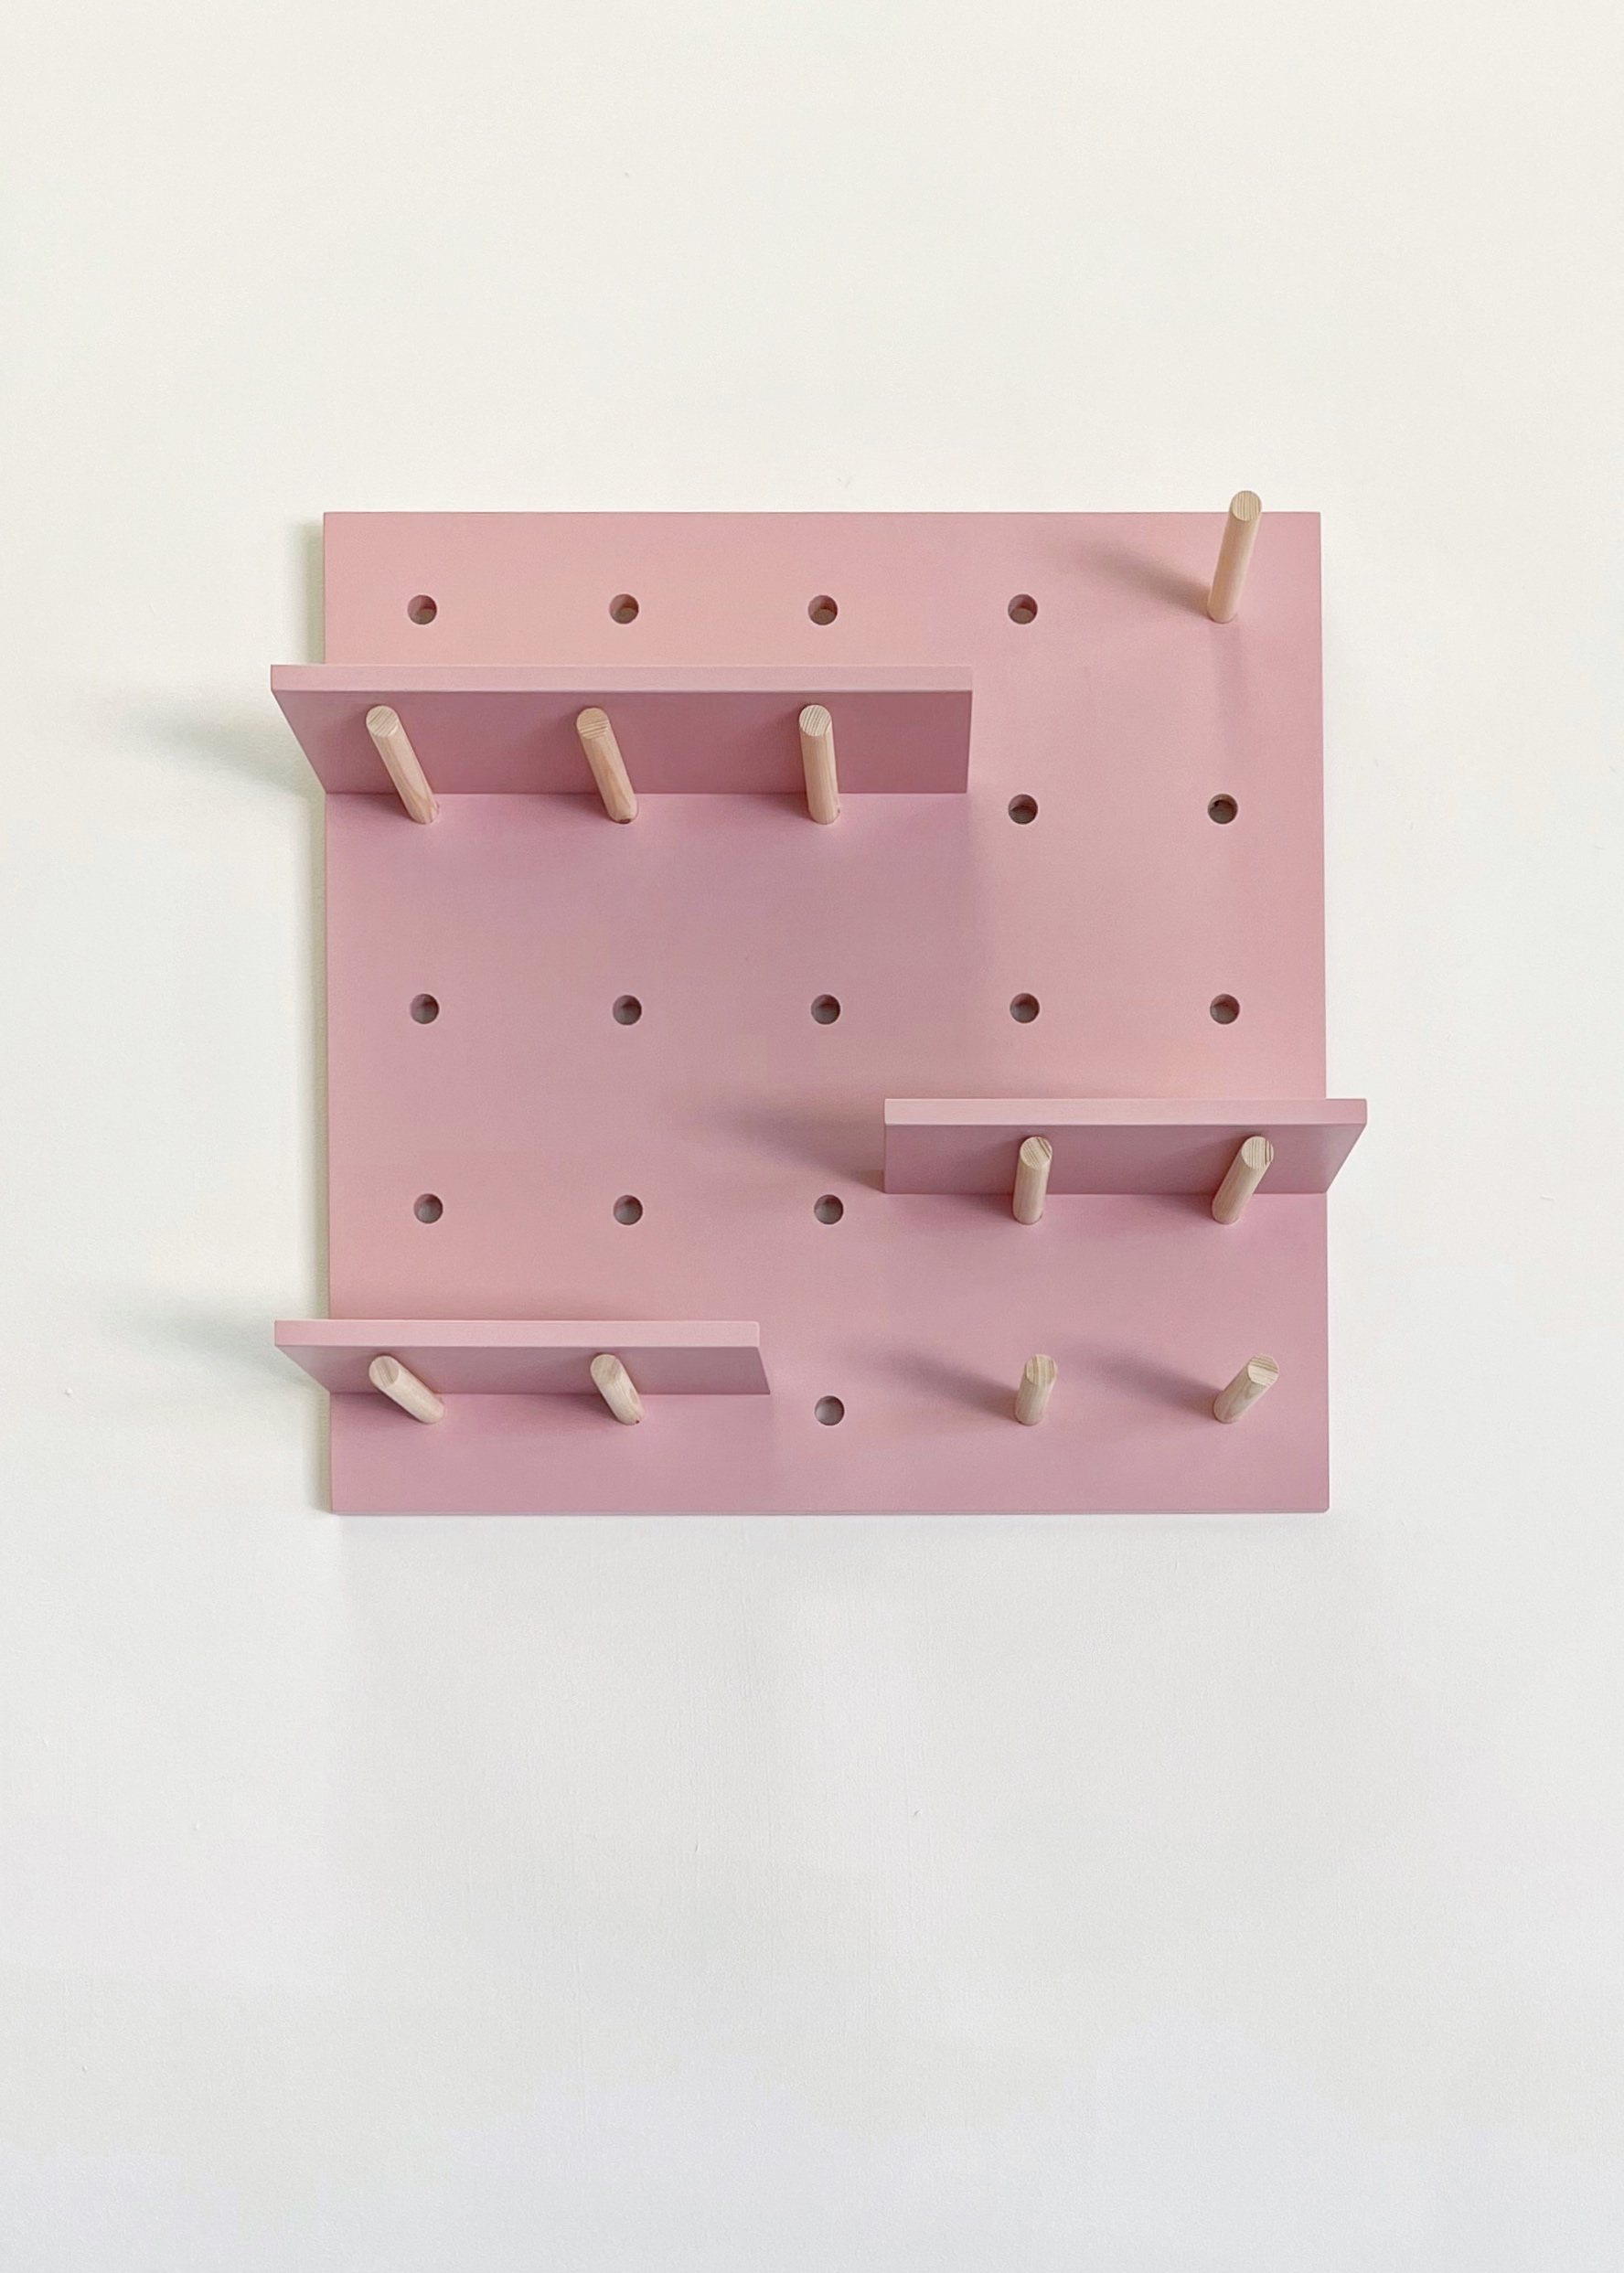 Little Deer Square Pegboard Adjustable Shelving Unit with Shelves & Pegs in Blush Pink